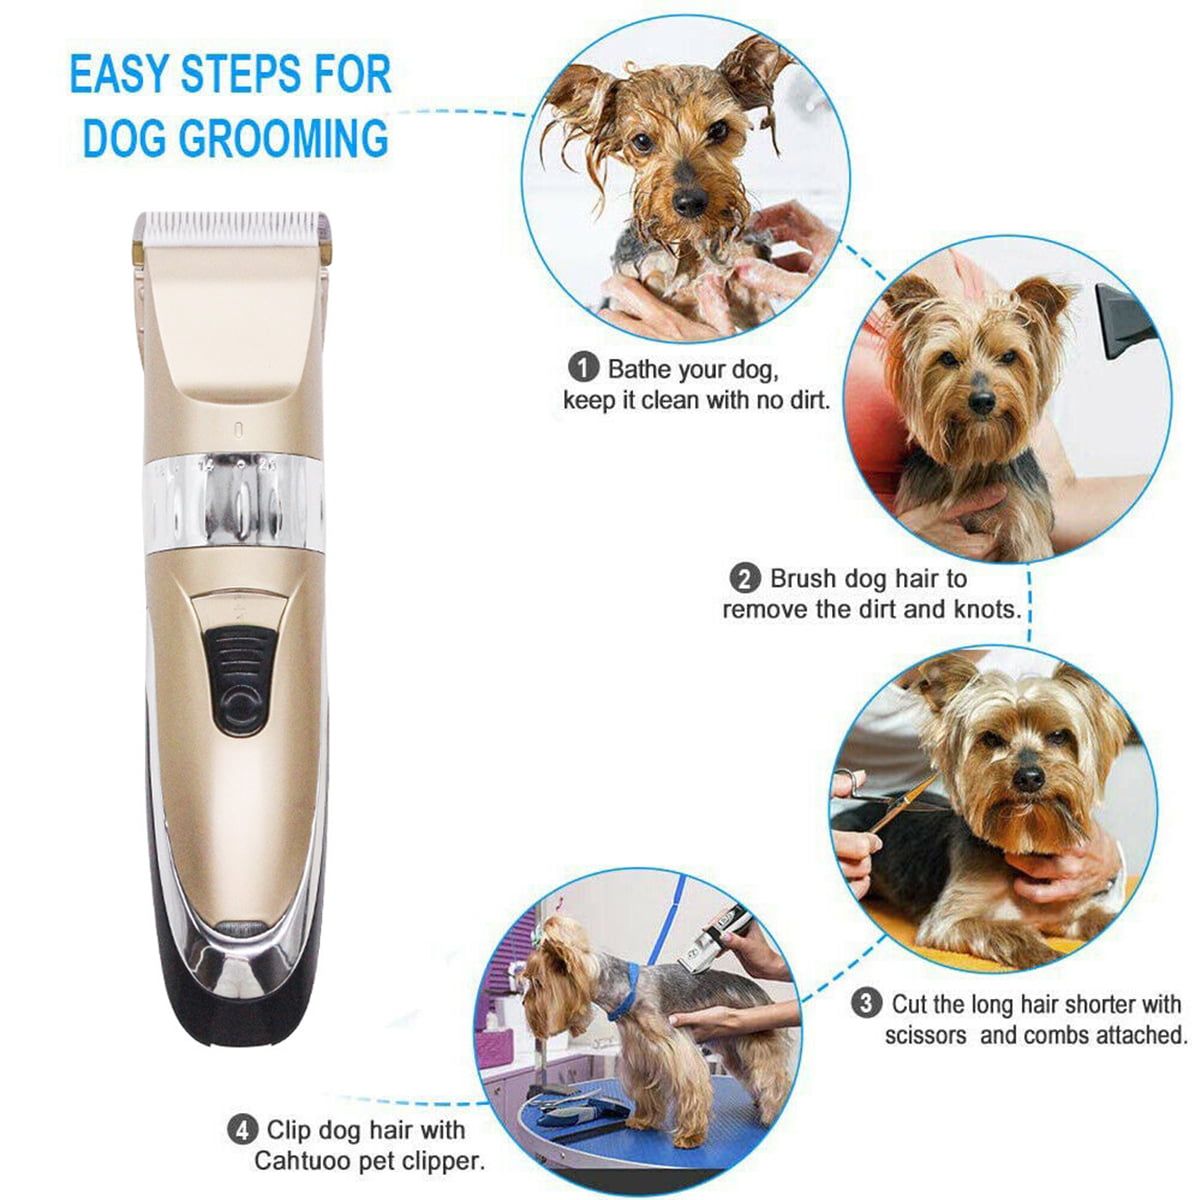 Domipet Dog Electric Grooming Clippers Kits Pets Shavers Trimmers Professional Cordless Low Noise Heavy Duty Thick Coats for Small Big Dogs Cats 